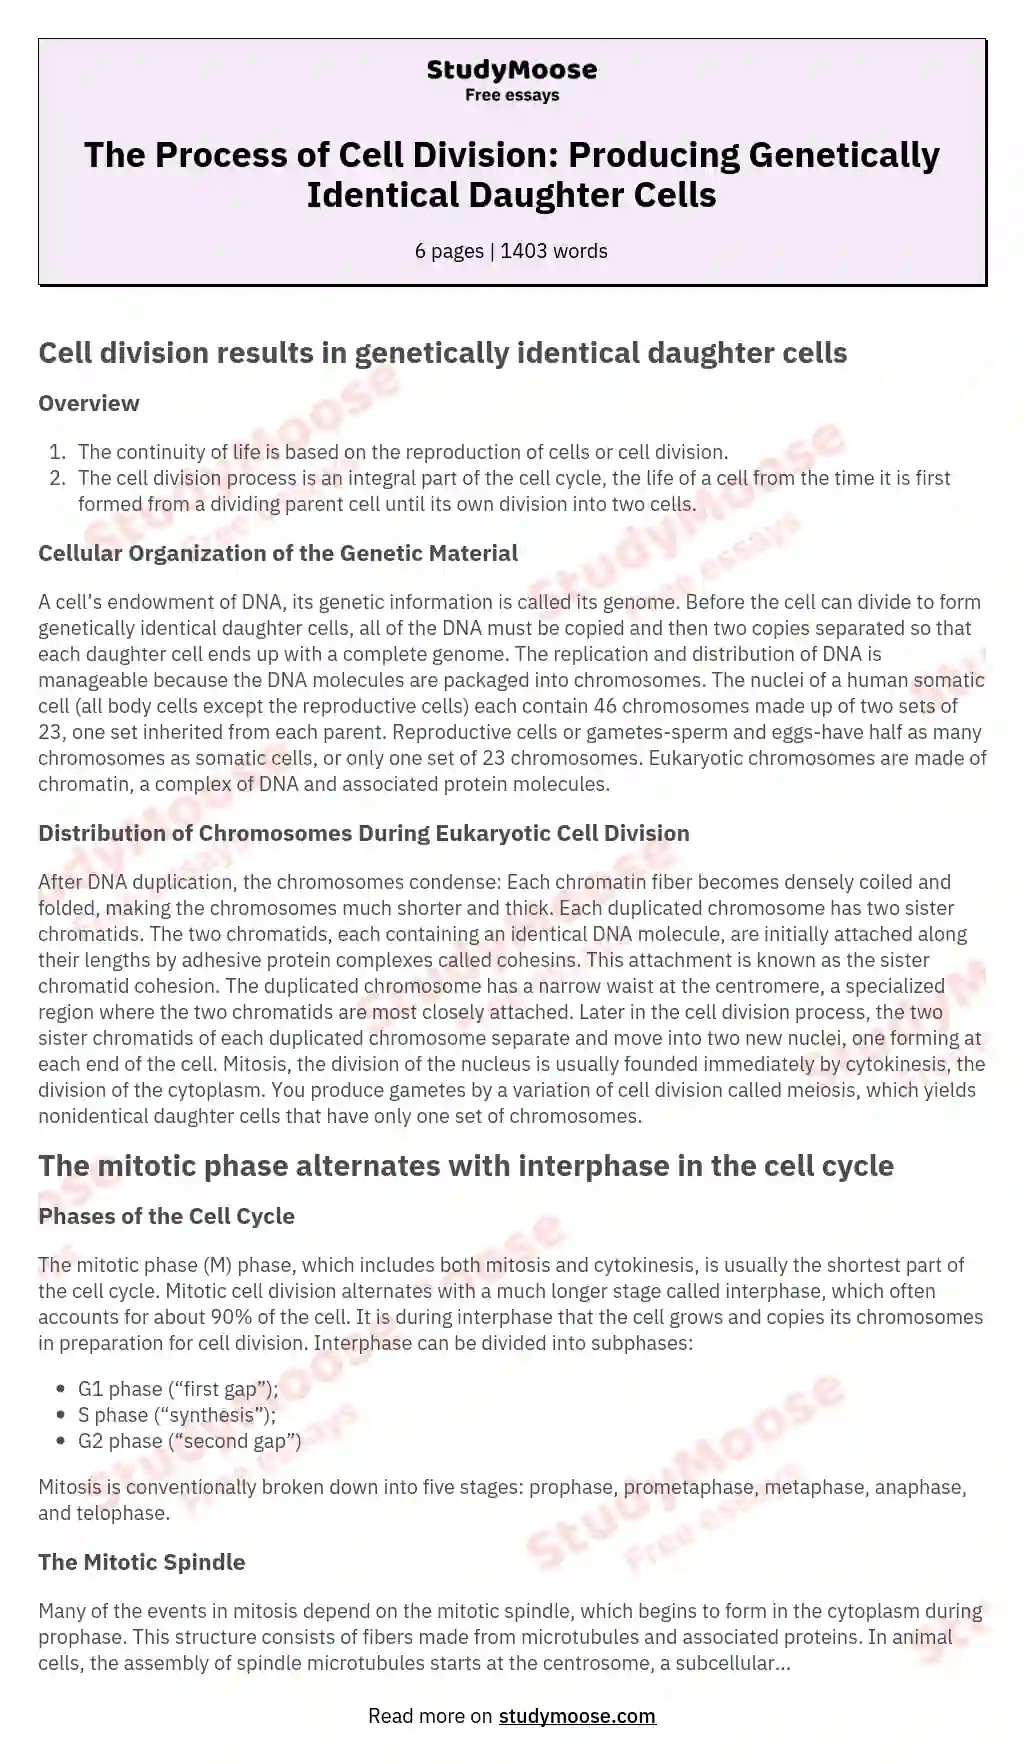 The Process of Cell Division: Producing Genetically Identical Daughter Cells essay